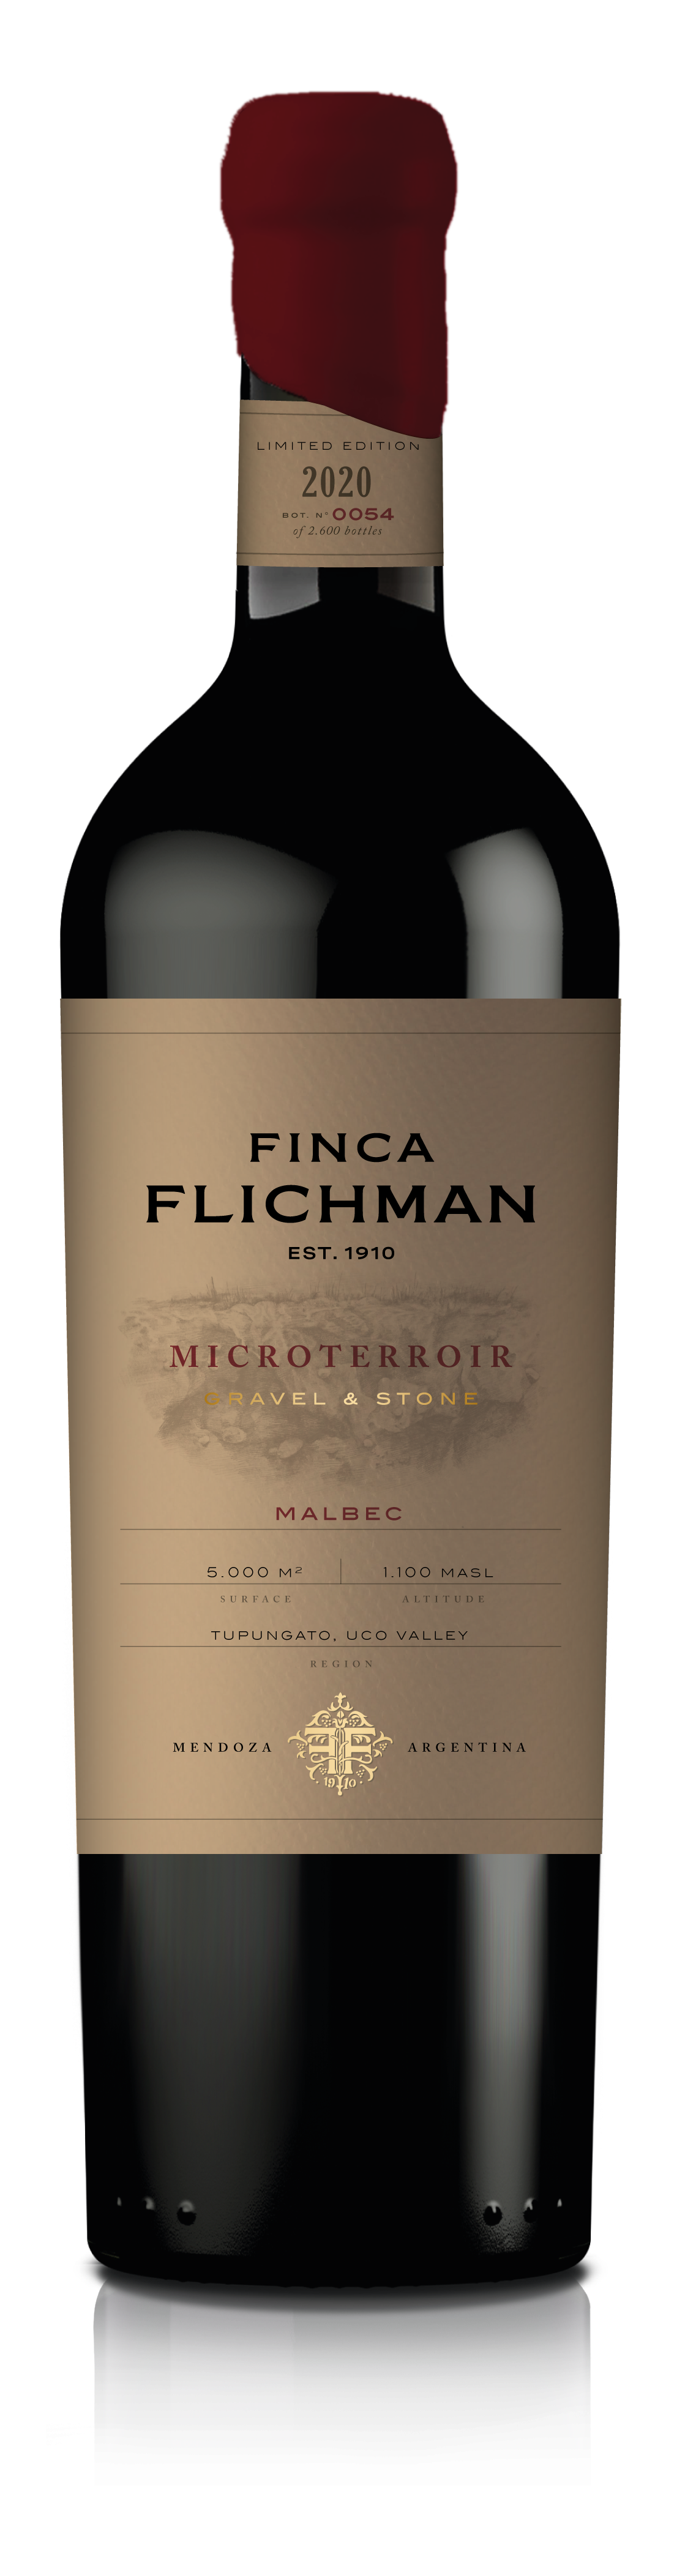 Finca Flichman, chosen by Decanter as the Producer of the Best Malbec in the World